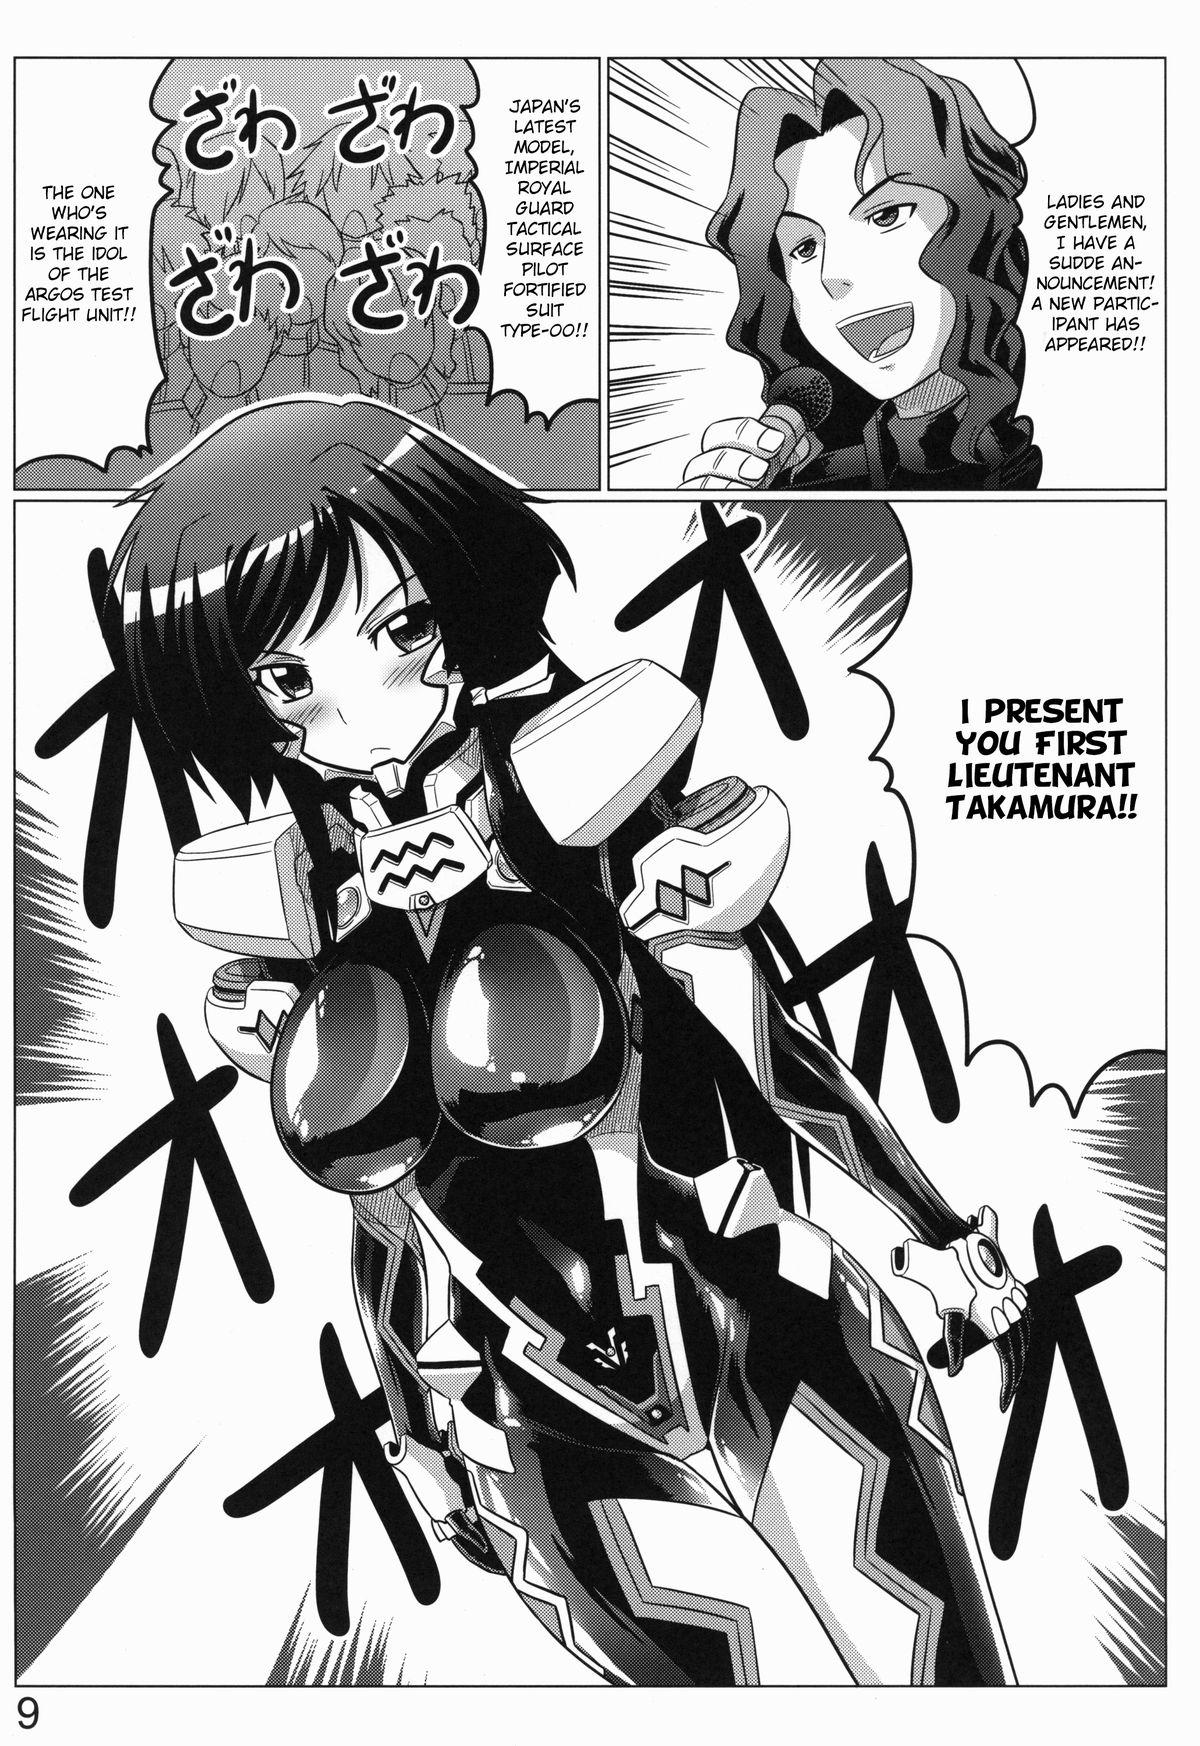 Phat Ass 0-Shiki LOVE - Muv-luv alternative total eclipse American - Page 8